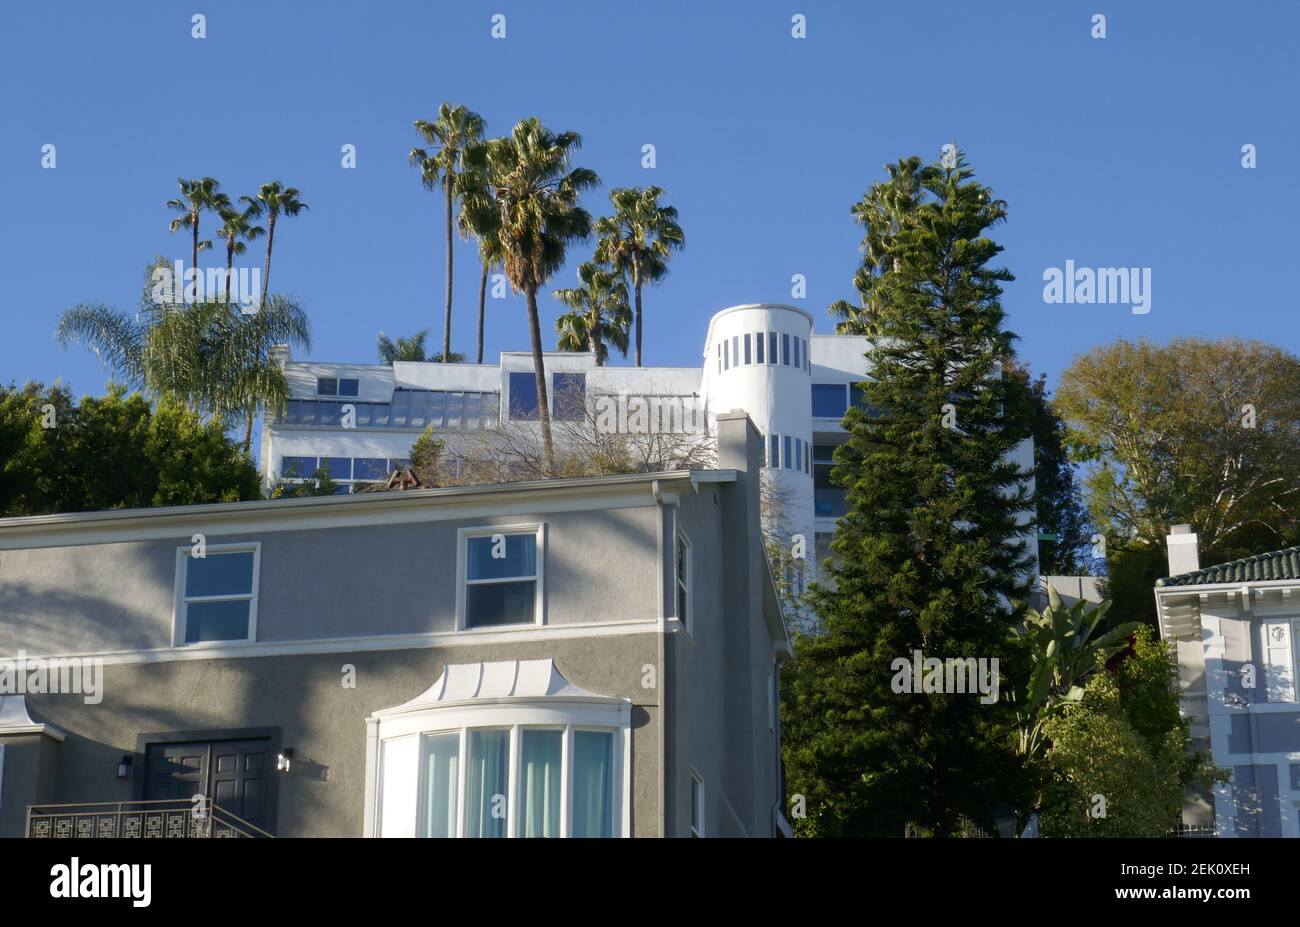 Los Angeles, California, USA 22nd February 2021 A general view of atmosphere of actress Kristen Stewart's home/house on February 22, 2021 in Los Angeles, California, USA. Photo by Barry King/Alamy Stock Photo Stock Photo